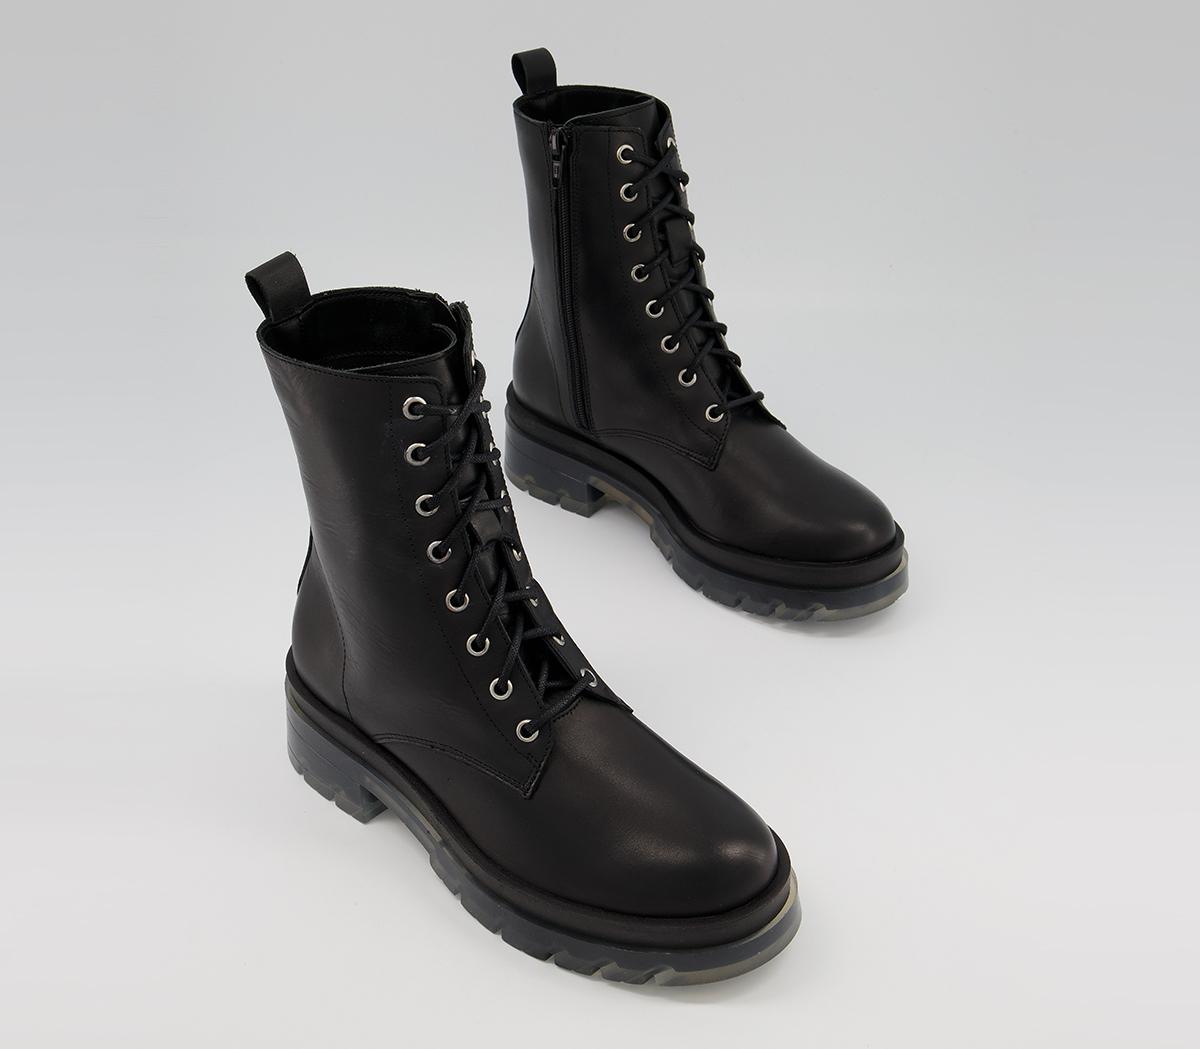 OFFICE Animate Clear Sole Lace Up Boots Black Leather - Women's Ankle Boots